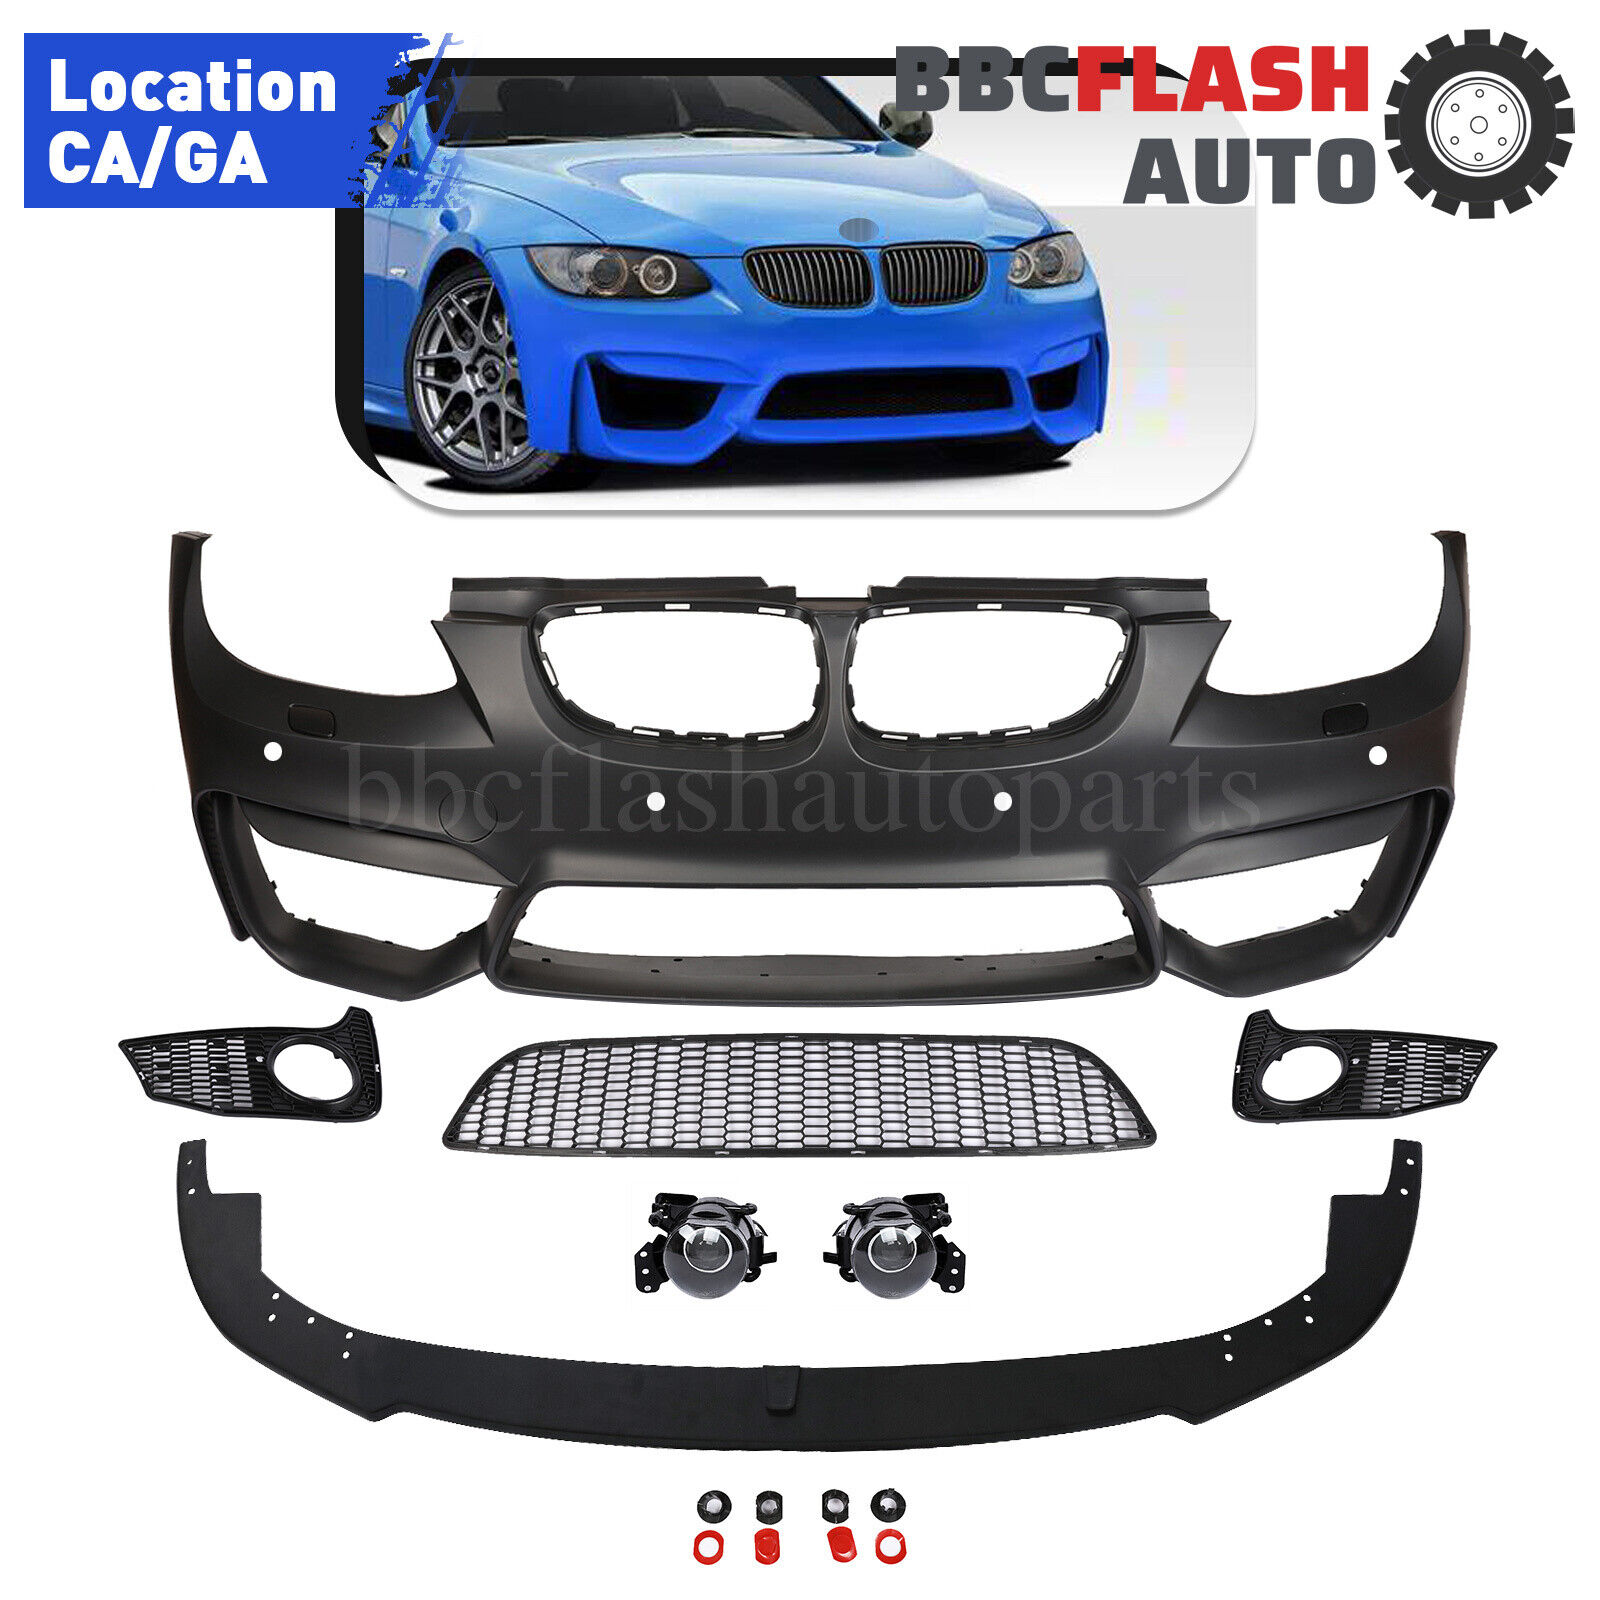 M4 Style Front Bumper Cover For BMW E92E93 328i 335i coupe convertible 2007-2010